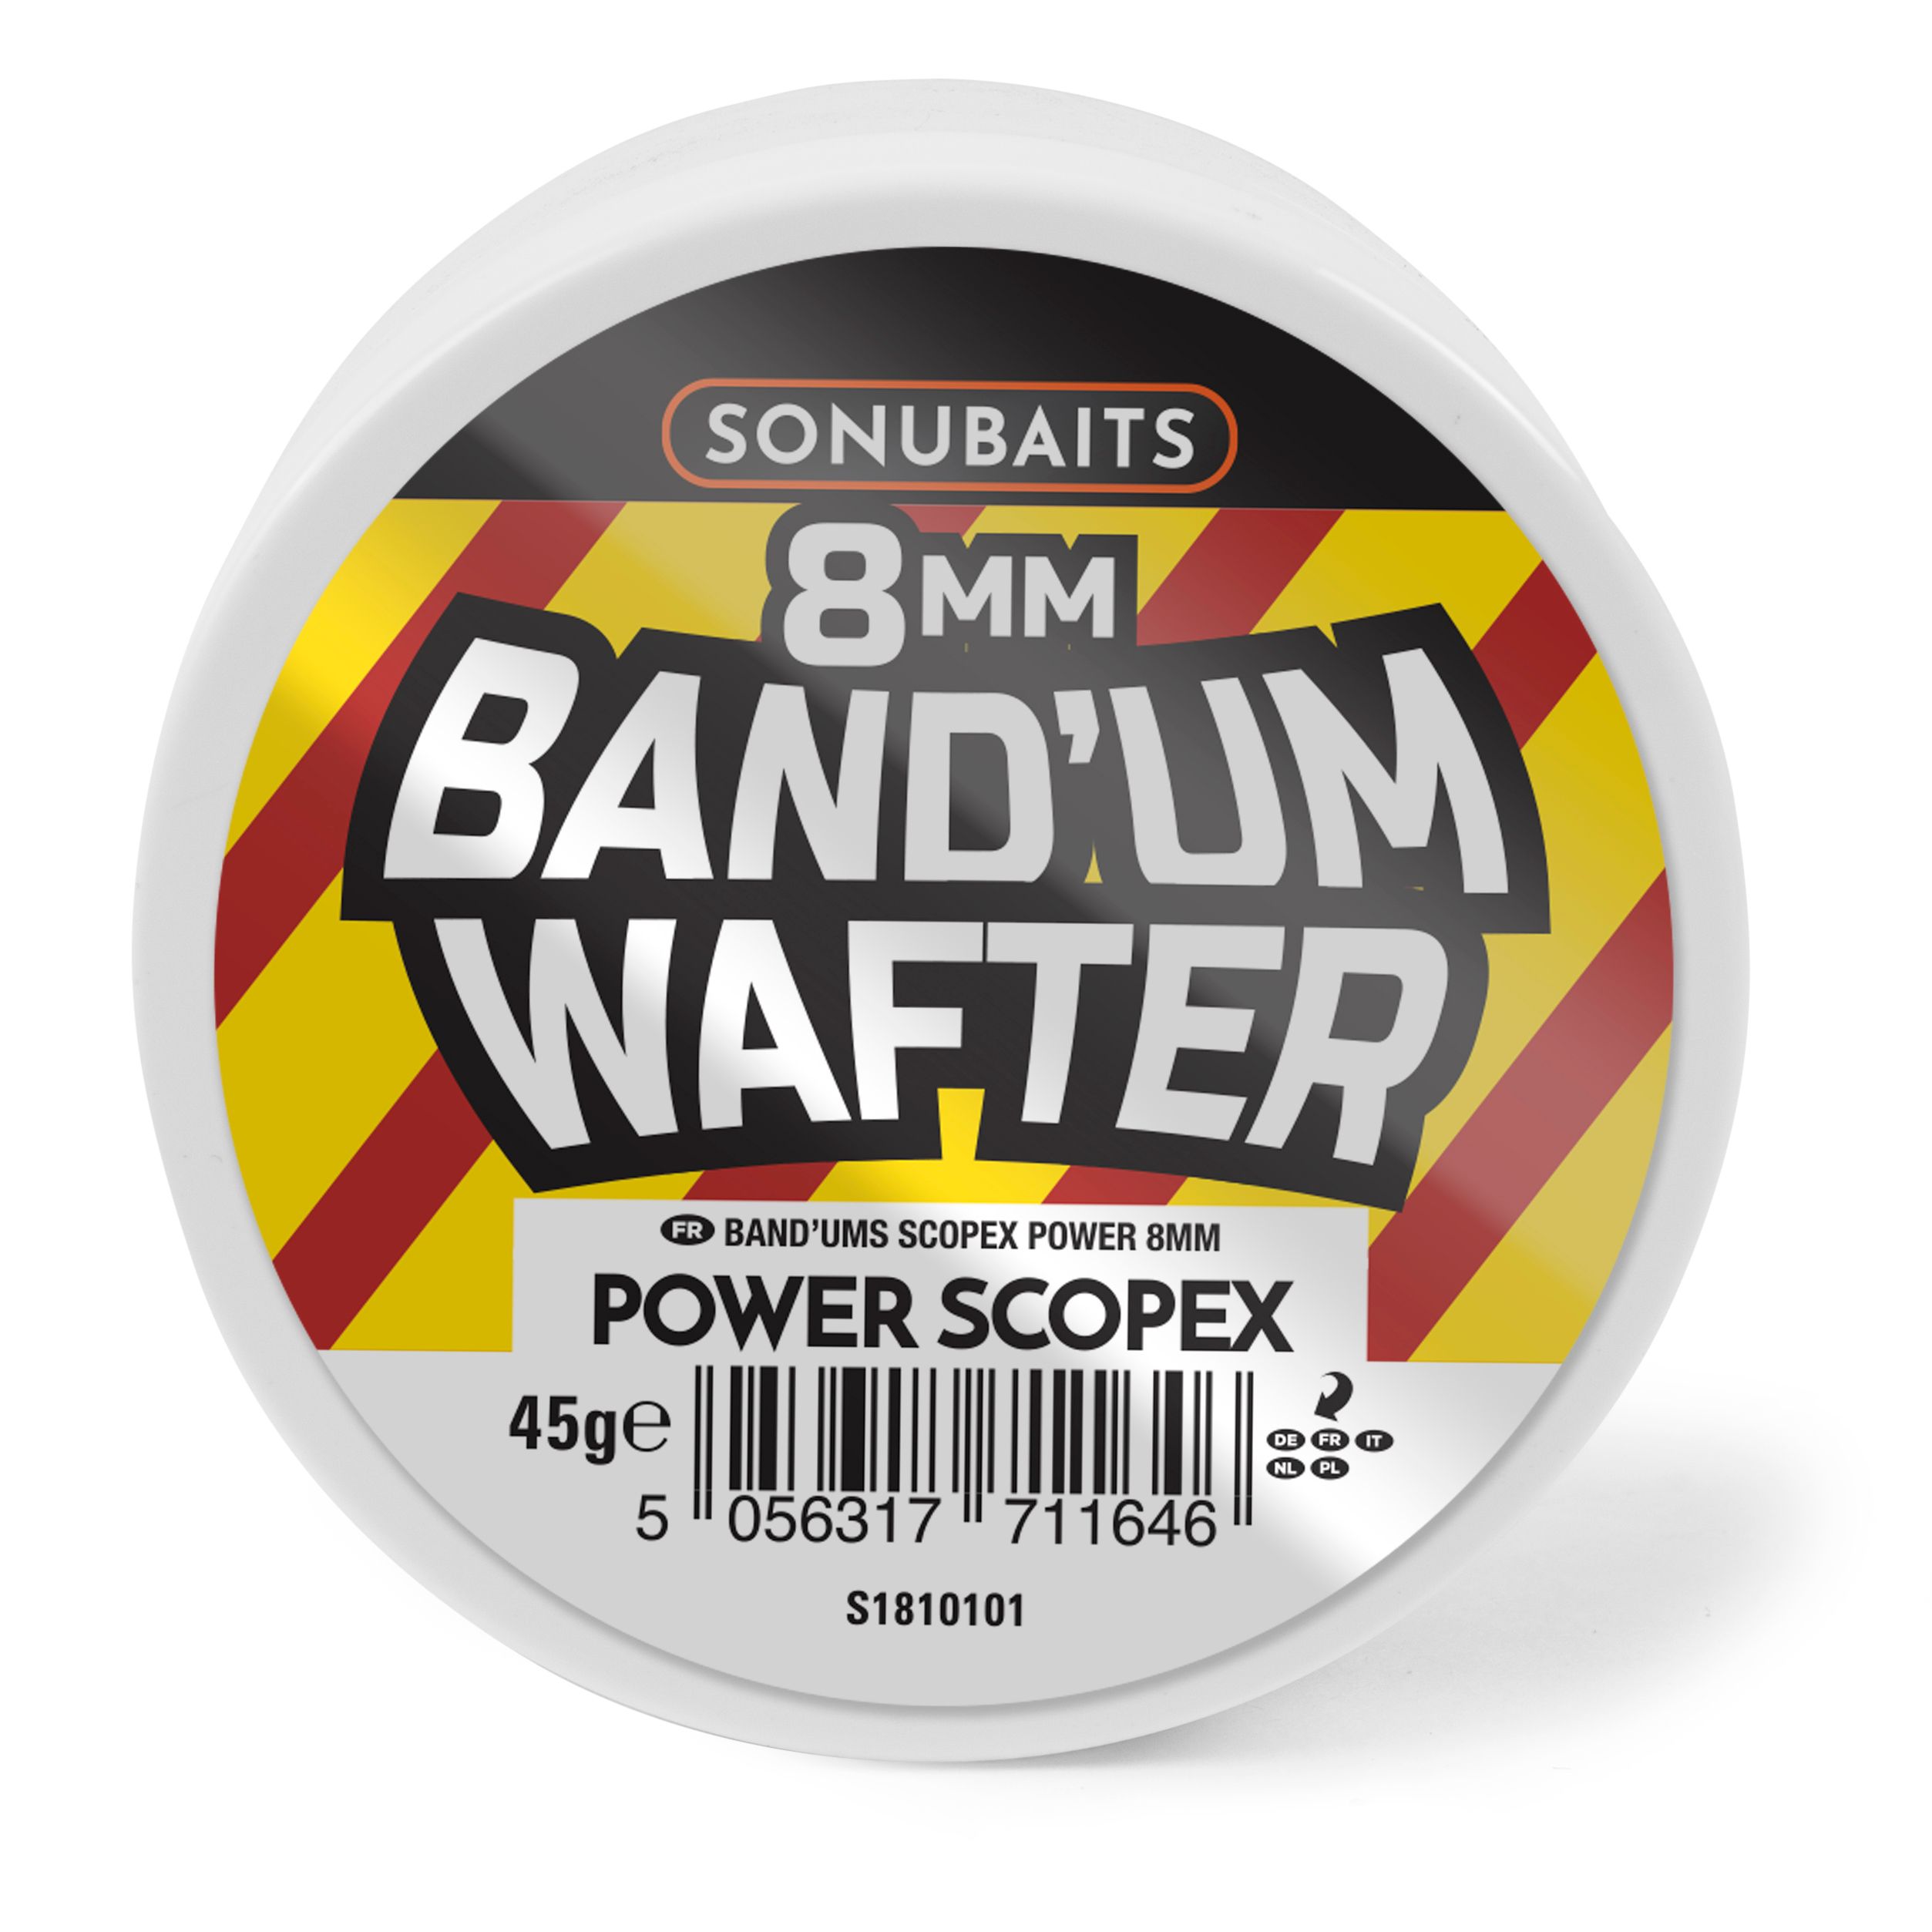 Sonubaits Band'um Wafters 8mm - Power Scopex